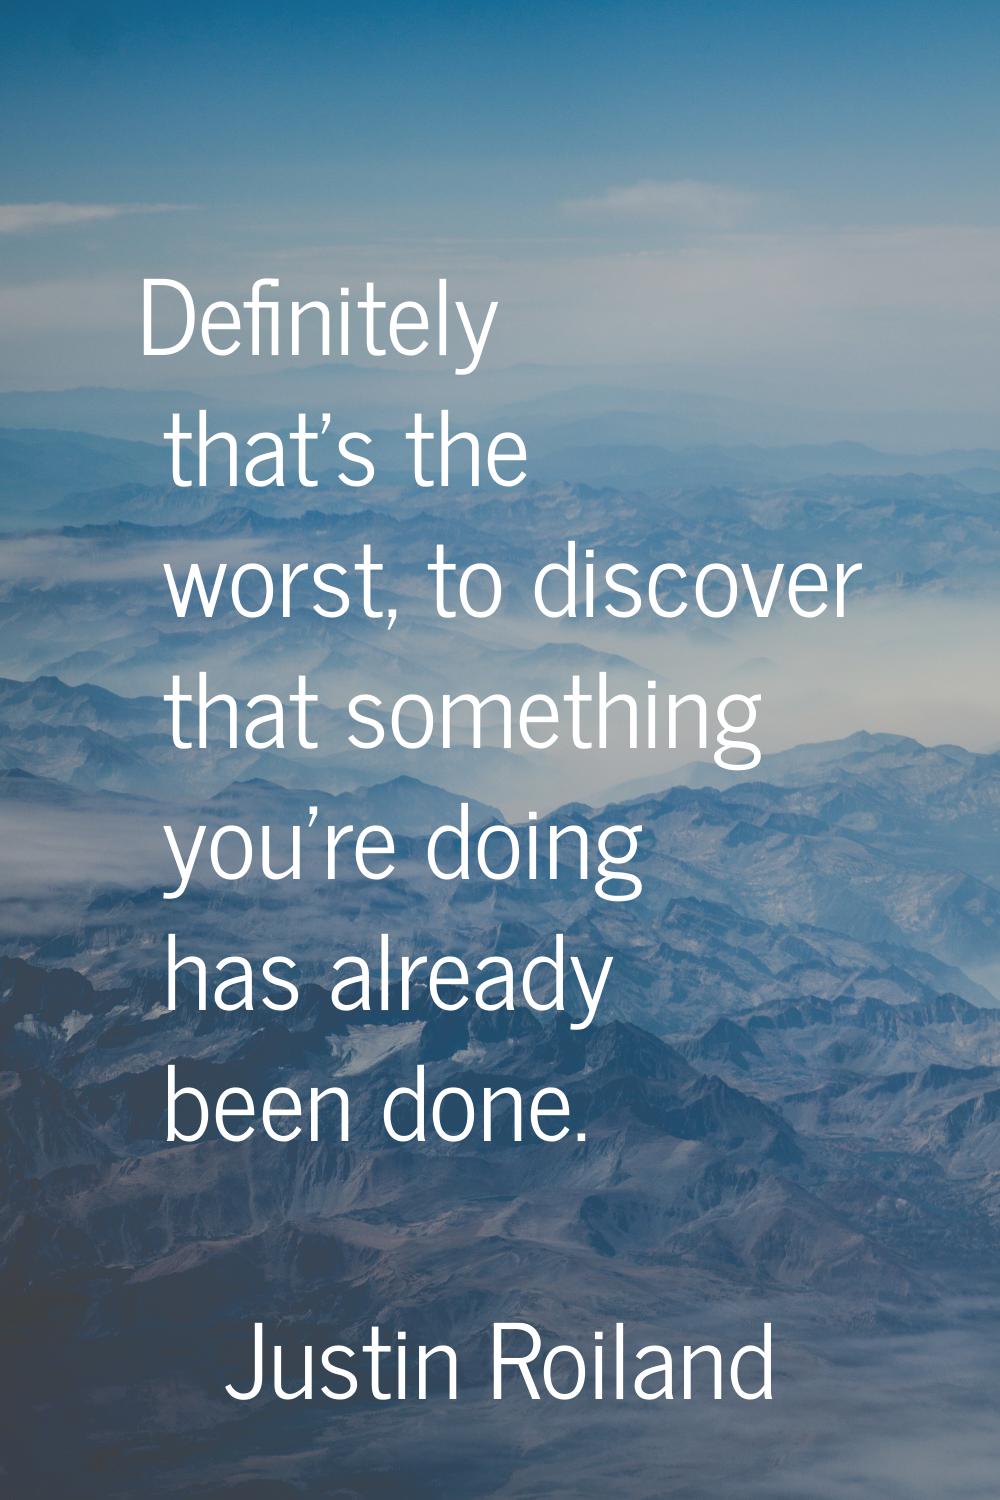 Definitely that's the worst, to discover that something you're doing has already been done.